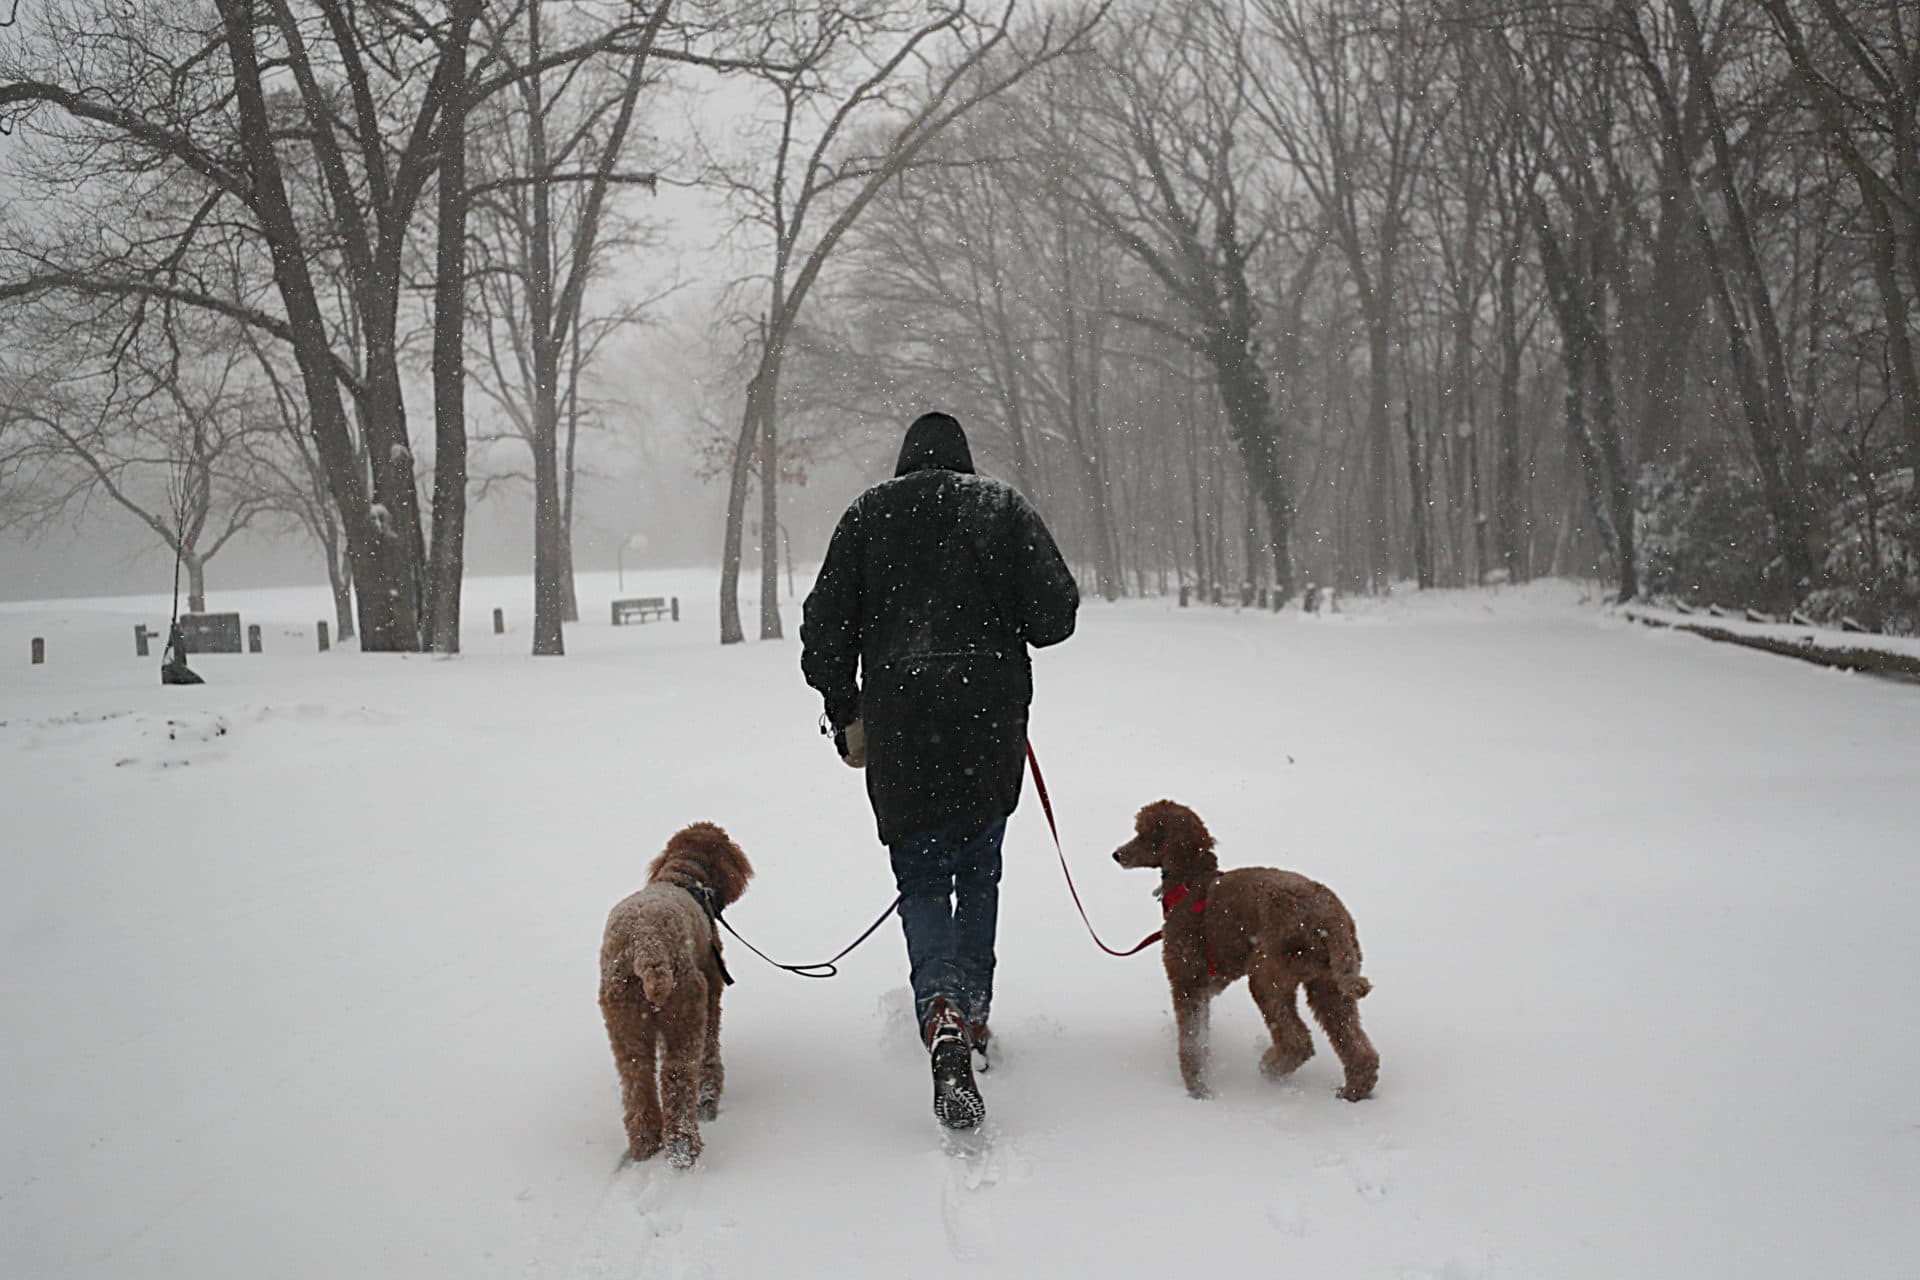 A person walks dogs at Cold Spring Park in Newton, Mass. during a winter nor'easter Saturday morning. (Suzanne Kreiter/The Boston Globe via Getty Images)